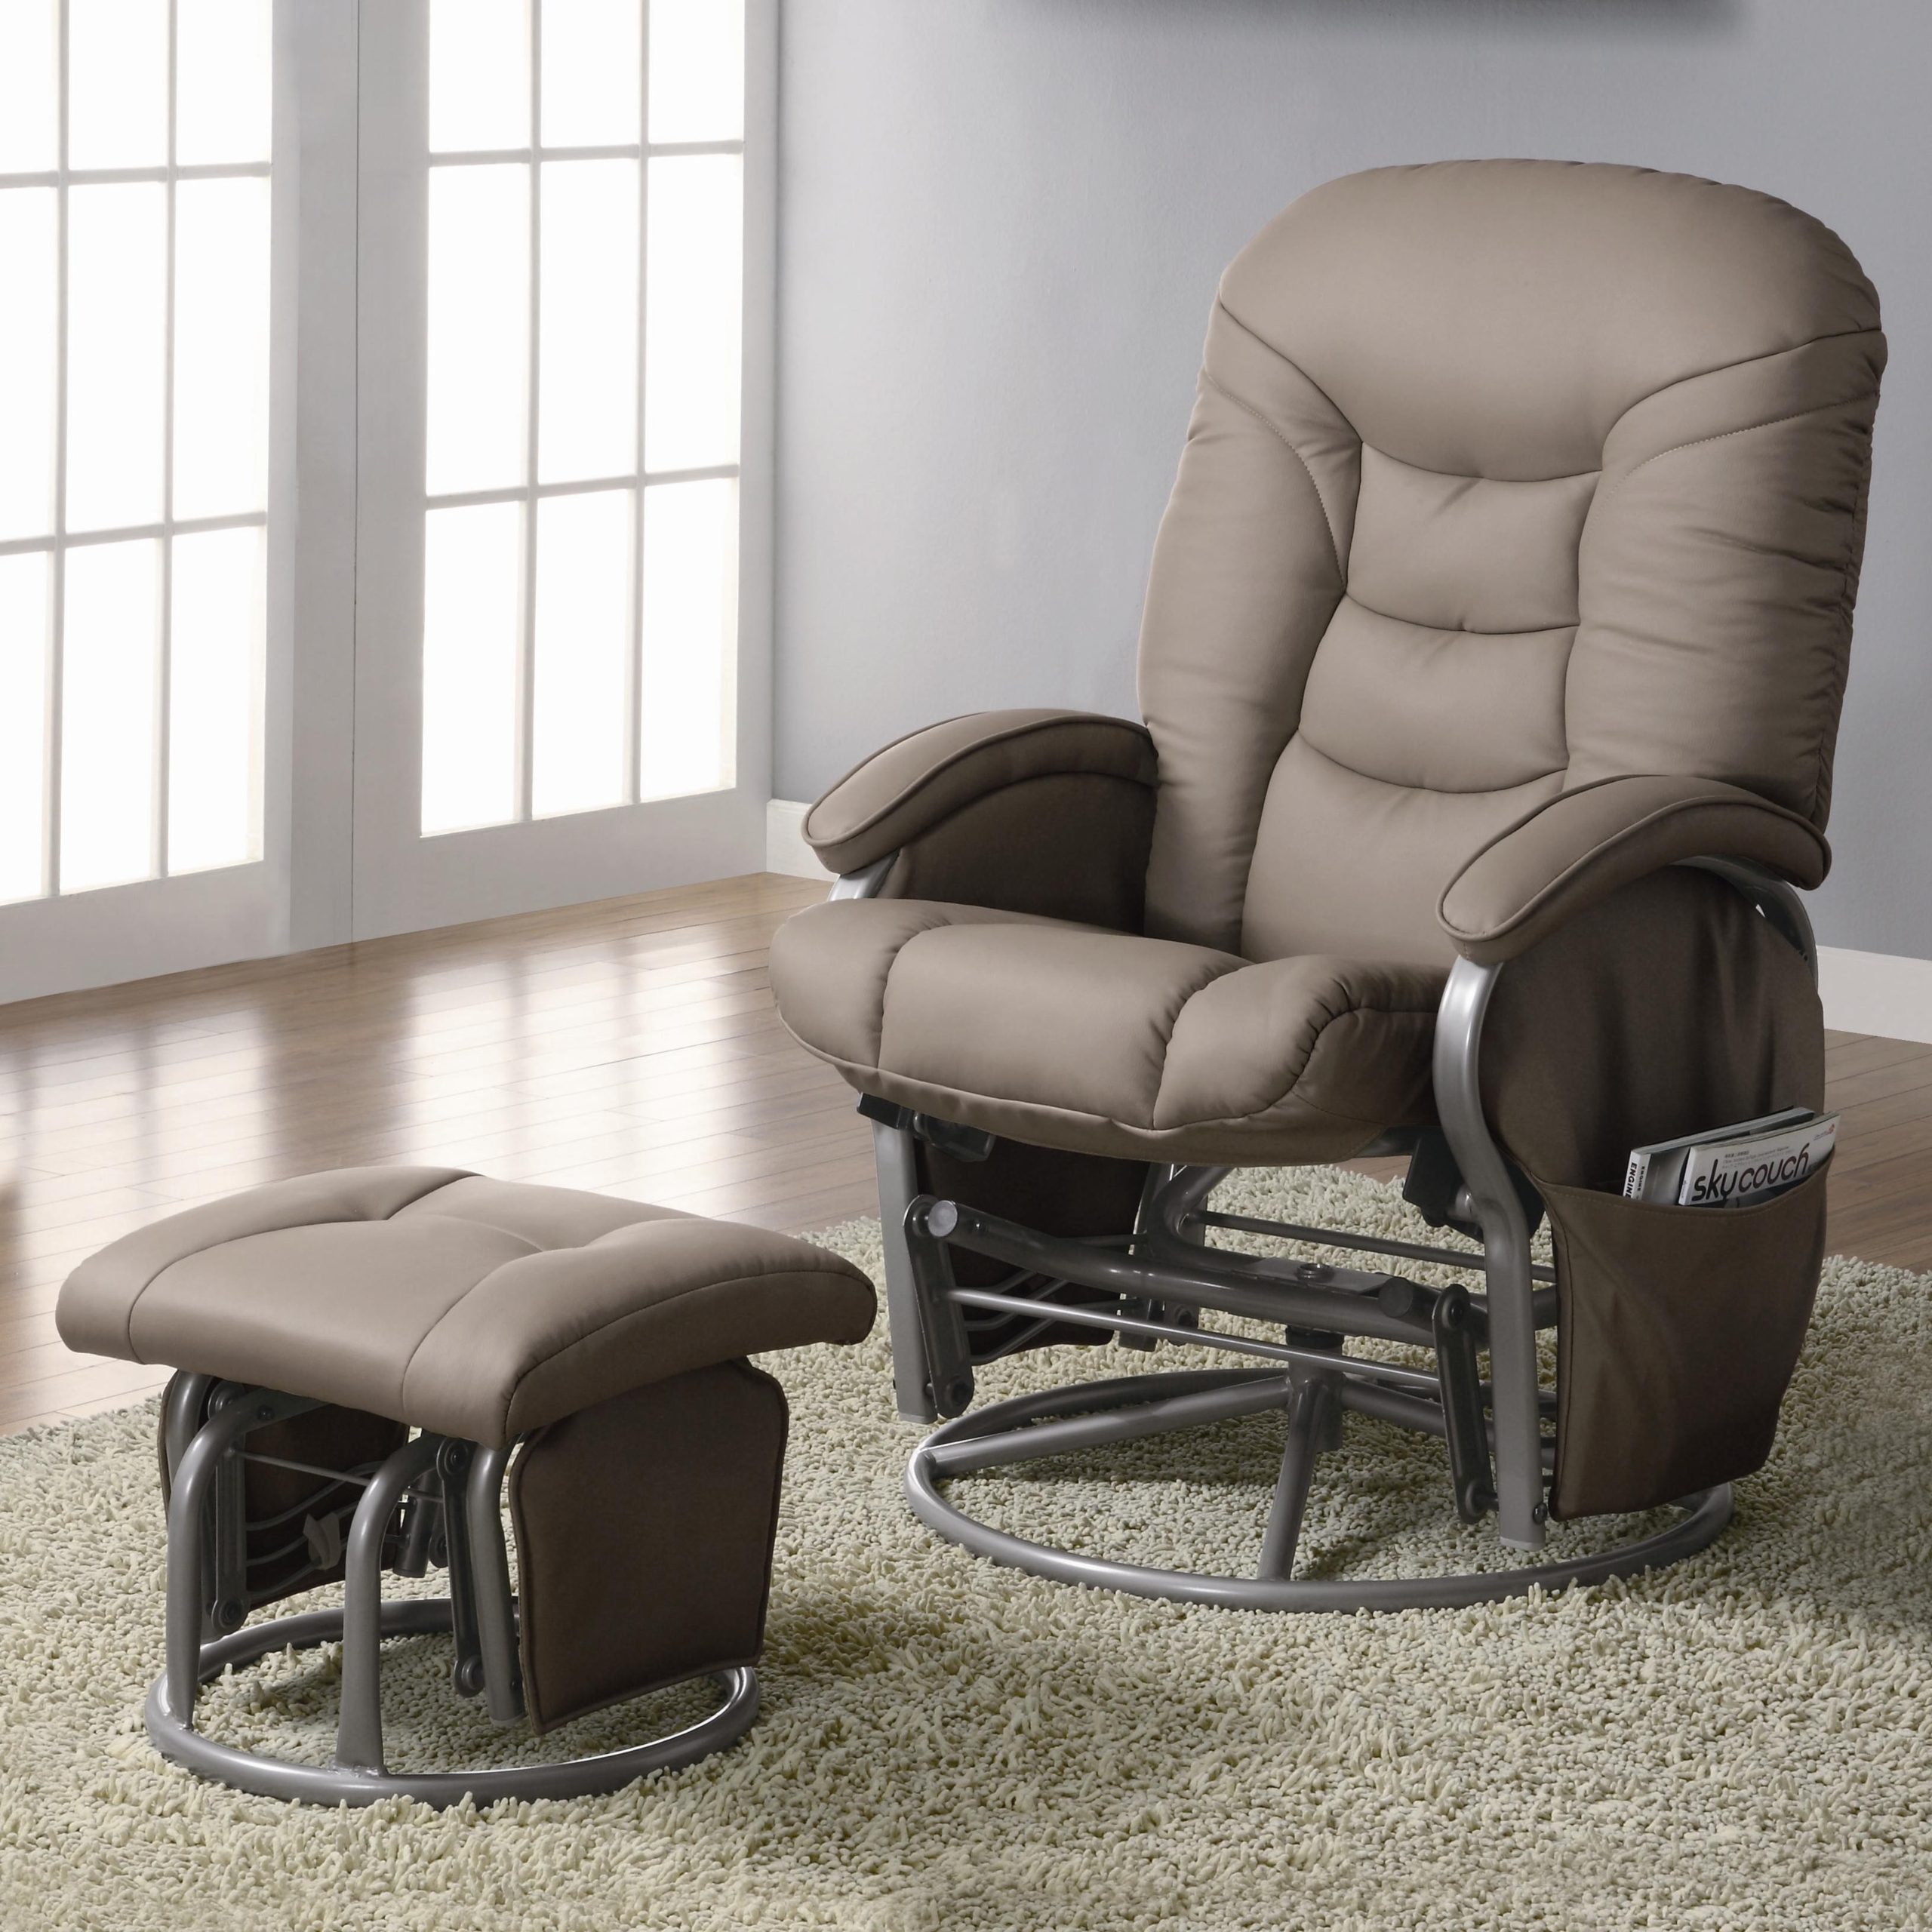 2PC Modern Swivel Rocking, Gliding Recliner Chair With Ottoman In Plush Leatherette. (Coaster Furniture 600228)